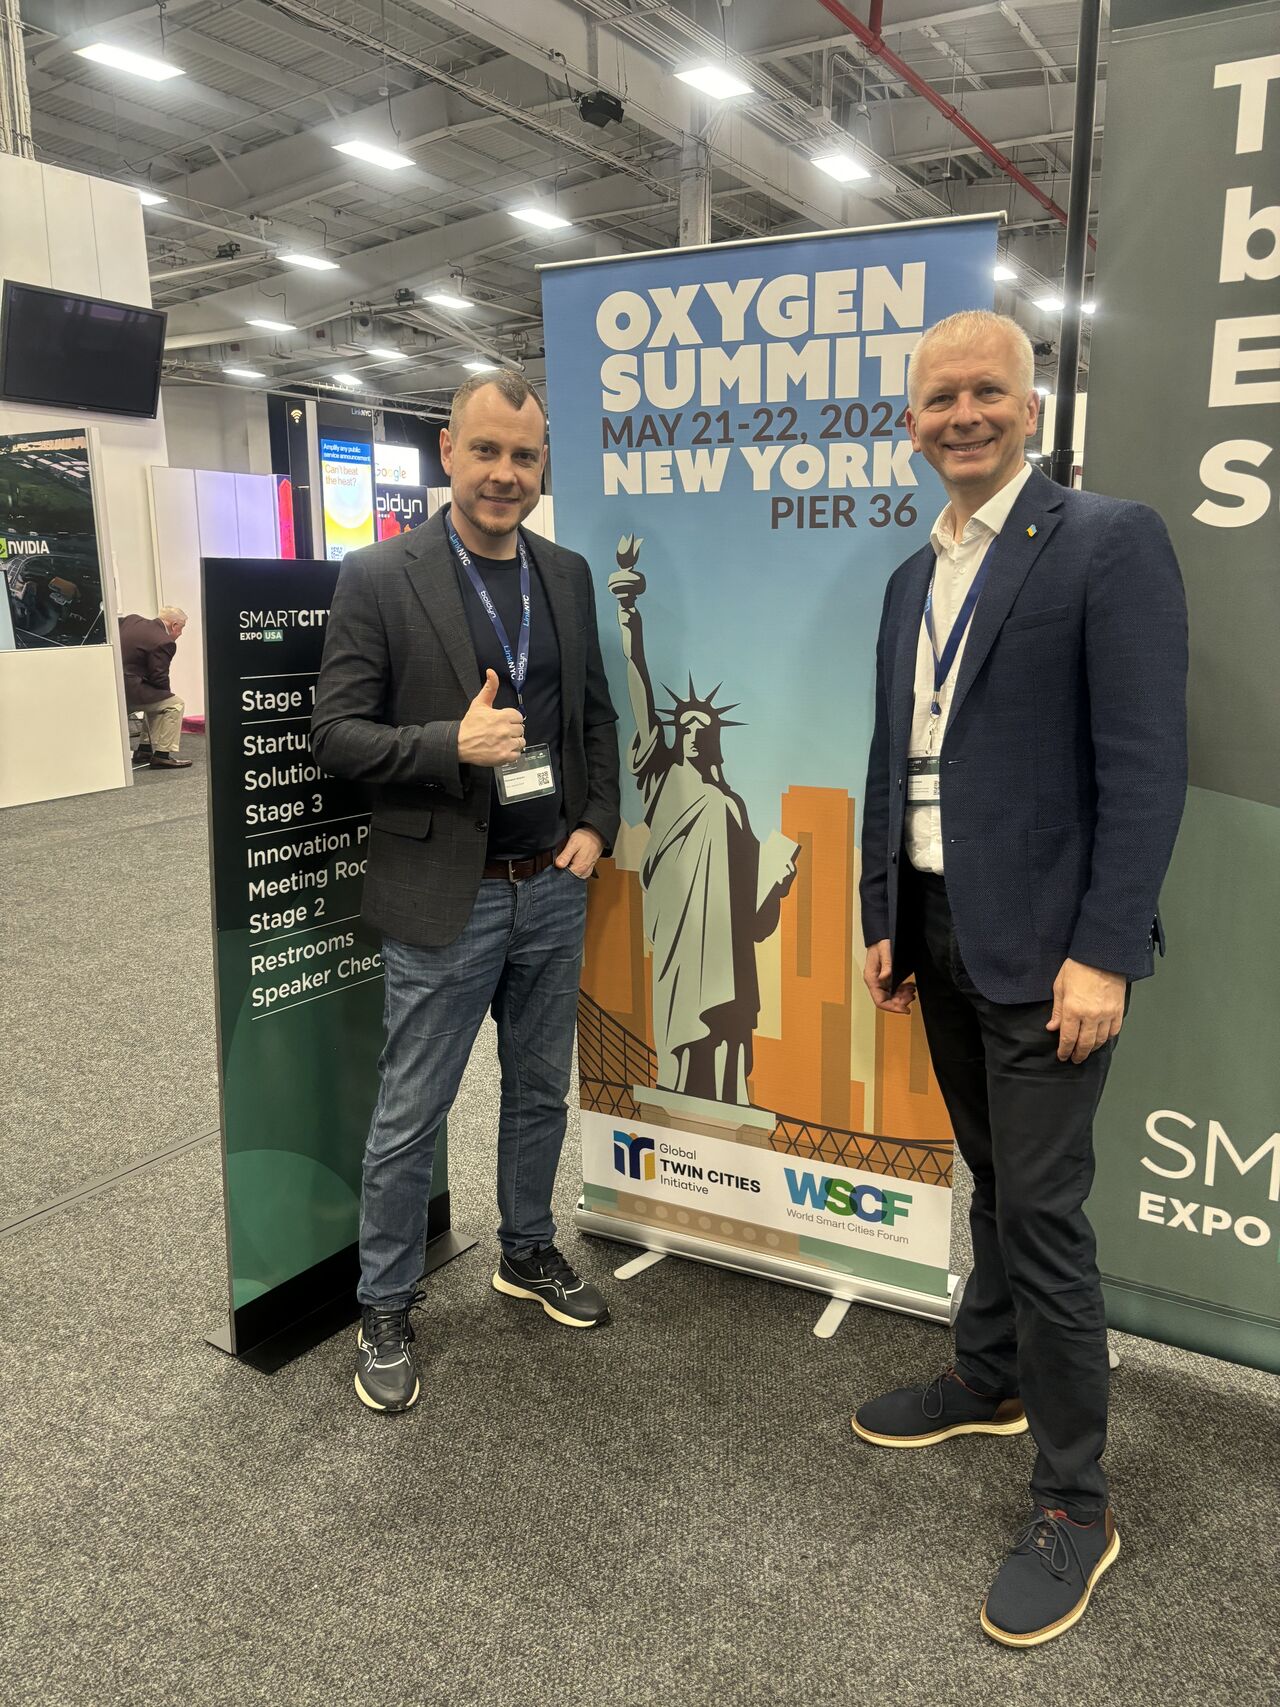 Oleksandr Iefremov, CEO of Kitsoft. at the OXYGEN Summit New York 2024 